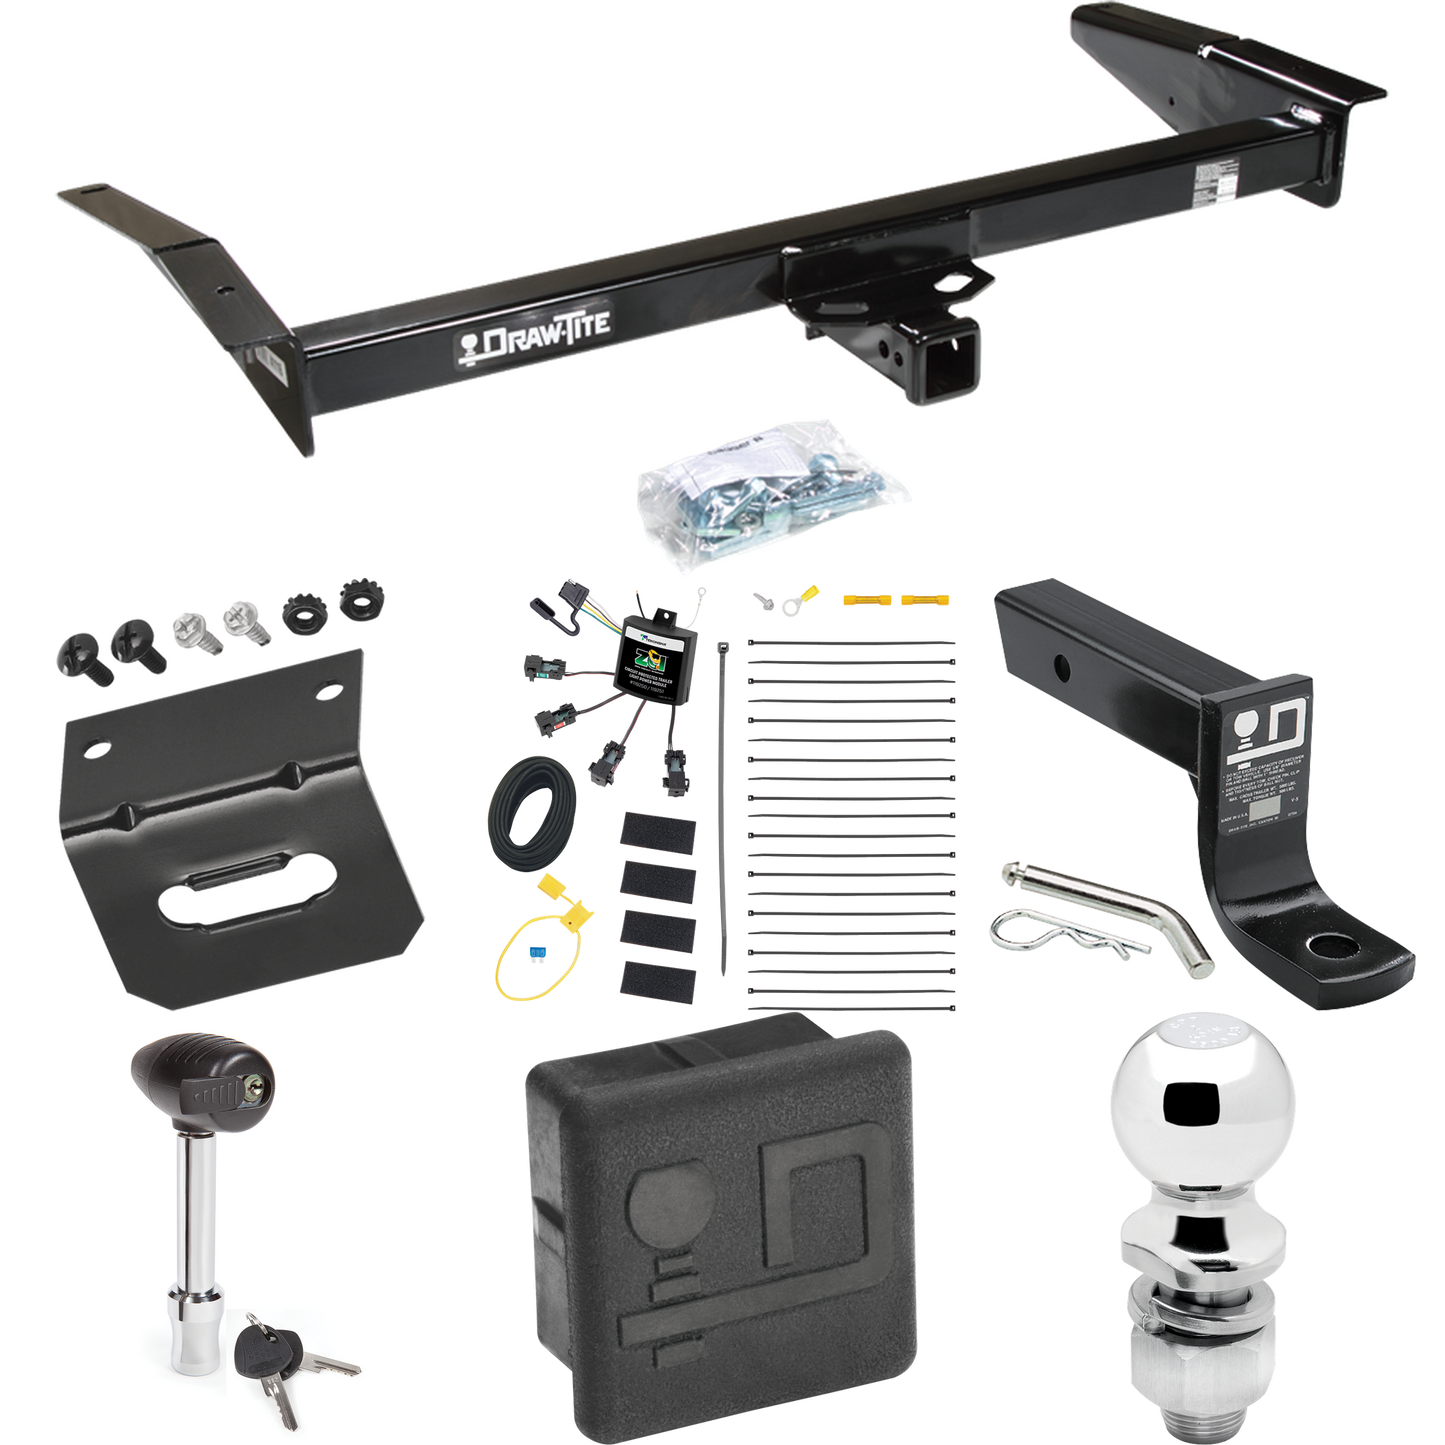 Fits 1981-2011 Lincoln Town Car Trailer Hitch Tow PKG w/ 4-Flat Zero Contact "No Splice" Wiring + Ball Mount w/ 4" Drop + 2" Ball + Wiring Bracket + Hitch Lock + Hitch Cover By Draw-Tite